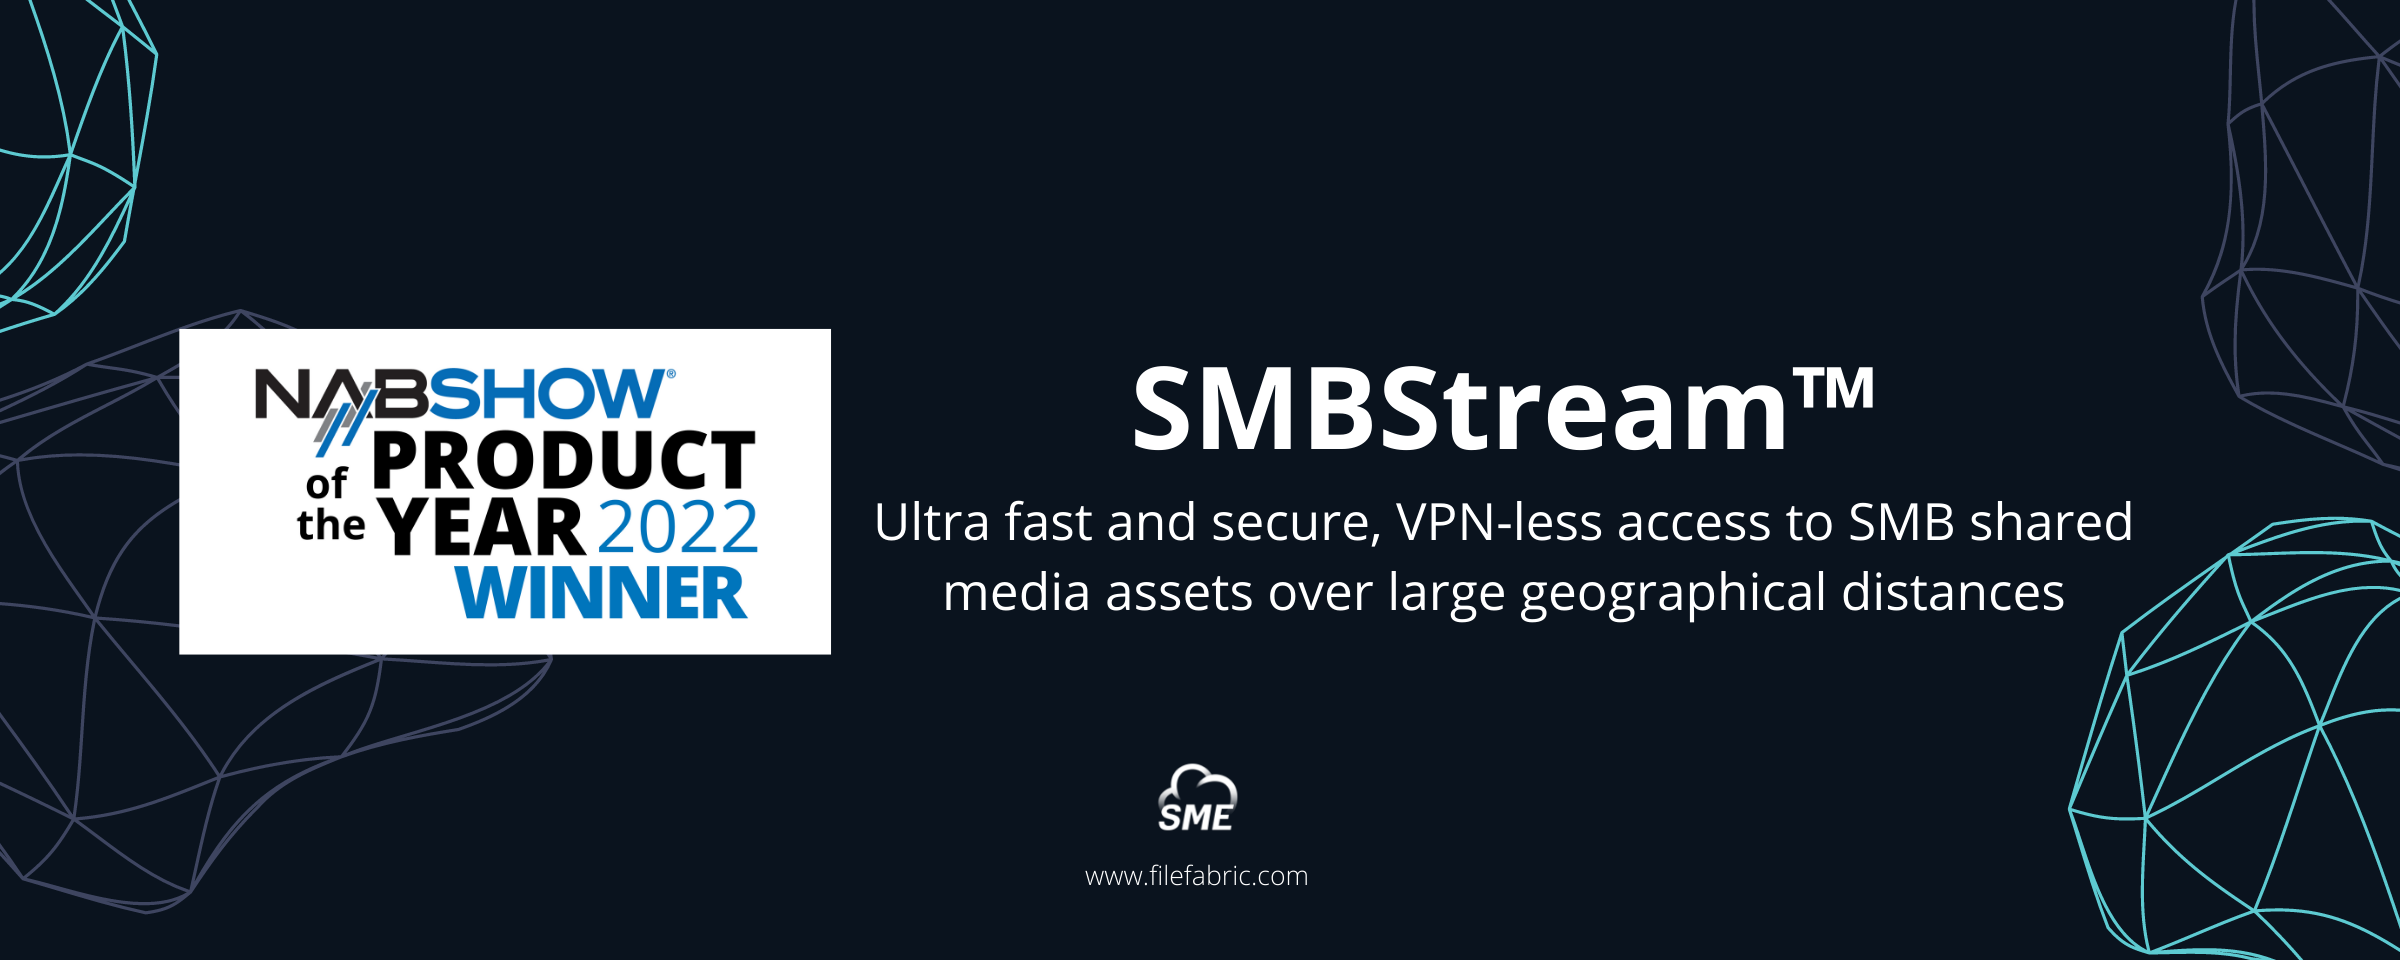 SMBStream™ from Storage Made Easy Wins 2022 NAB Show Product of the Year Award